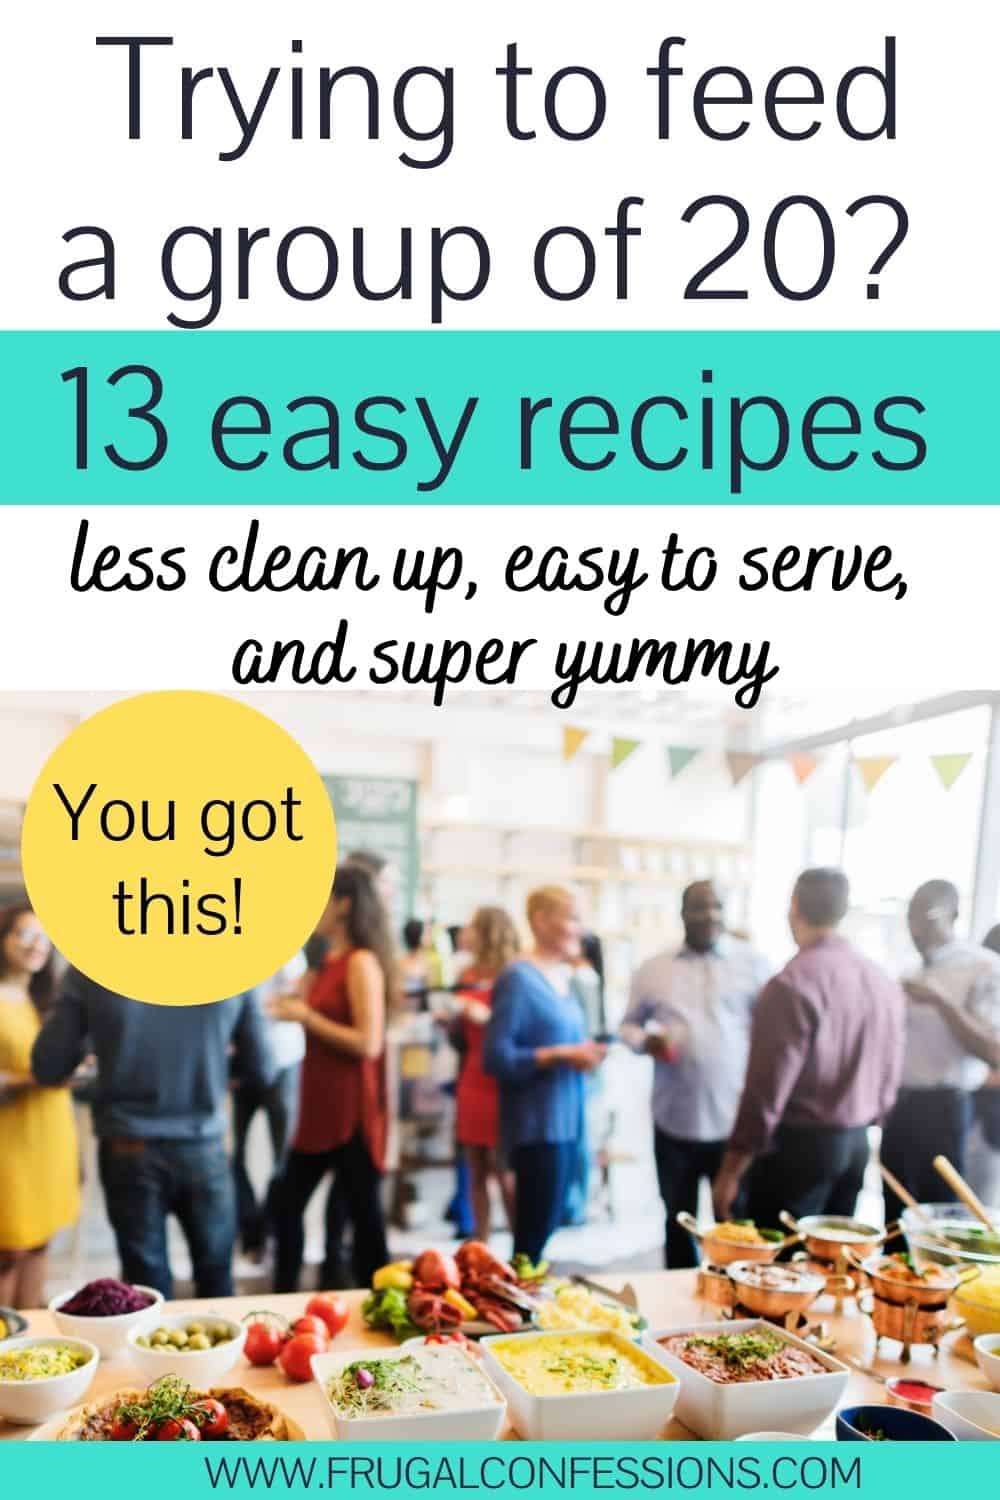 group of 20 people in the background of a food of table, text overlay "trying to feed 20? 13 easy recipes"